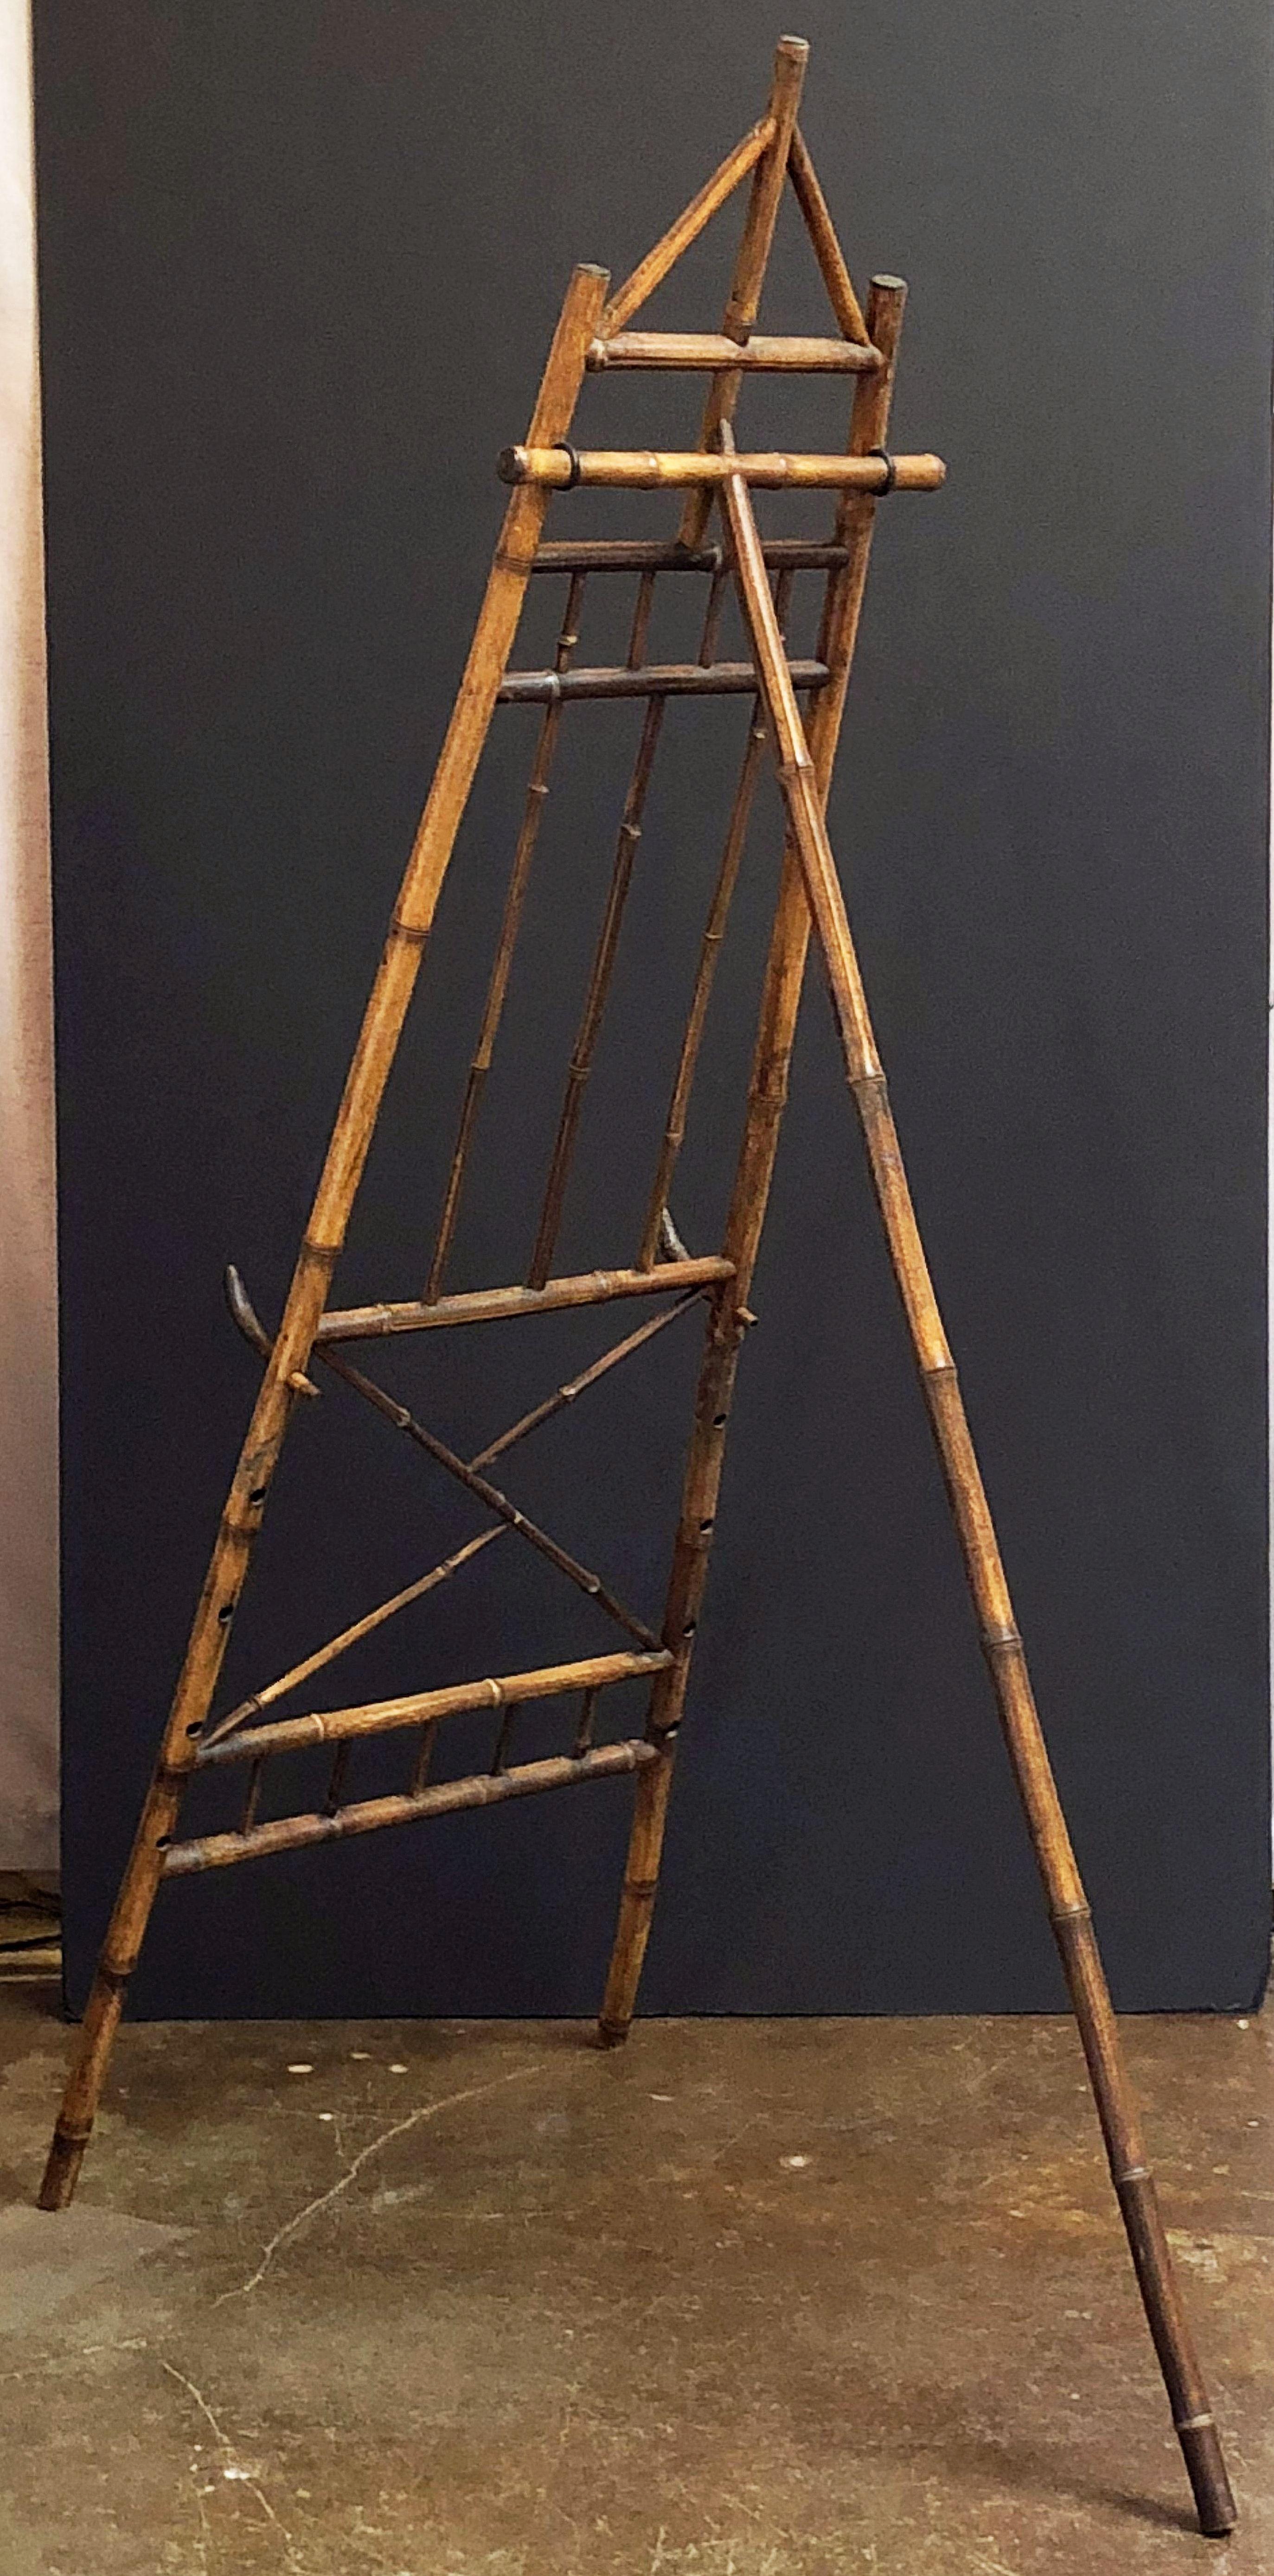 19th Century English Bamboo Display Easel from the Aesthetic Movement Period